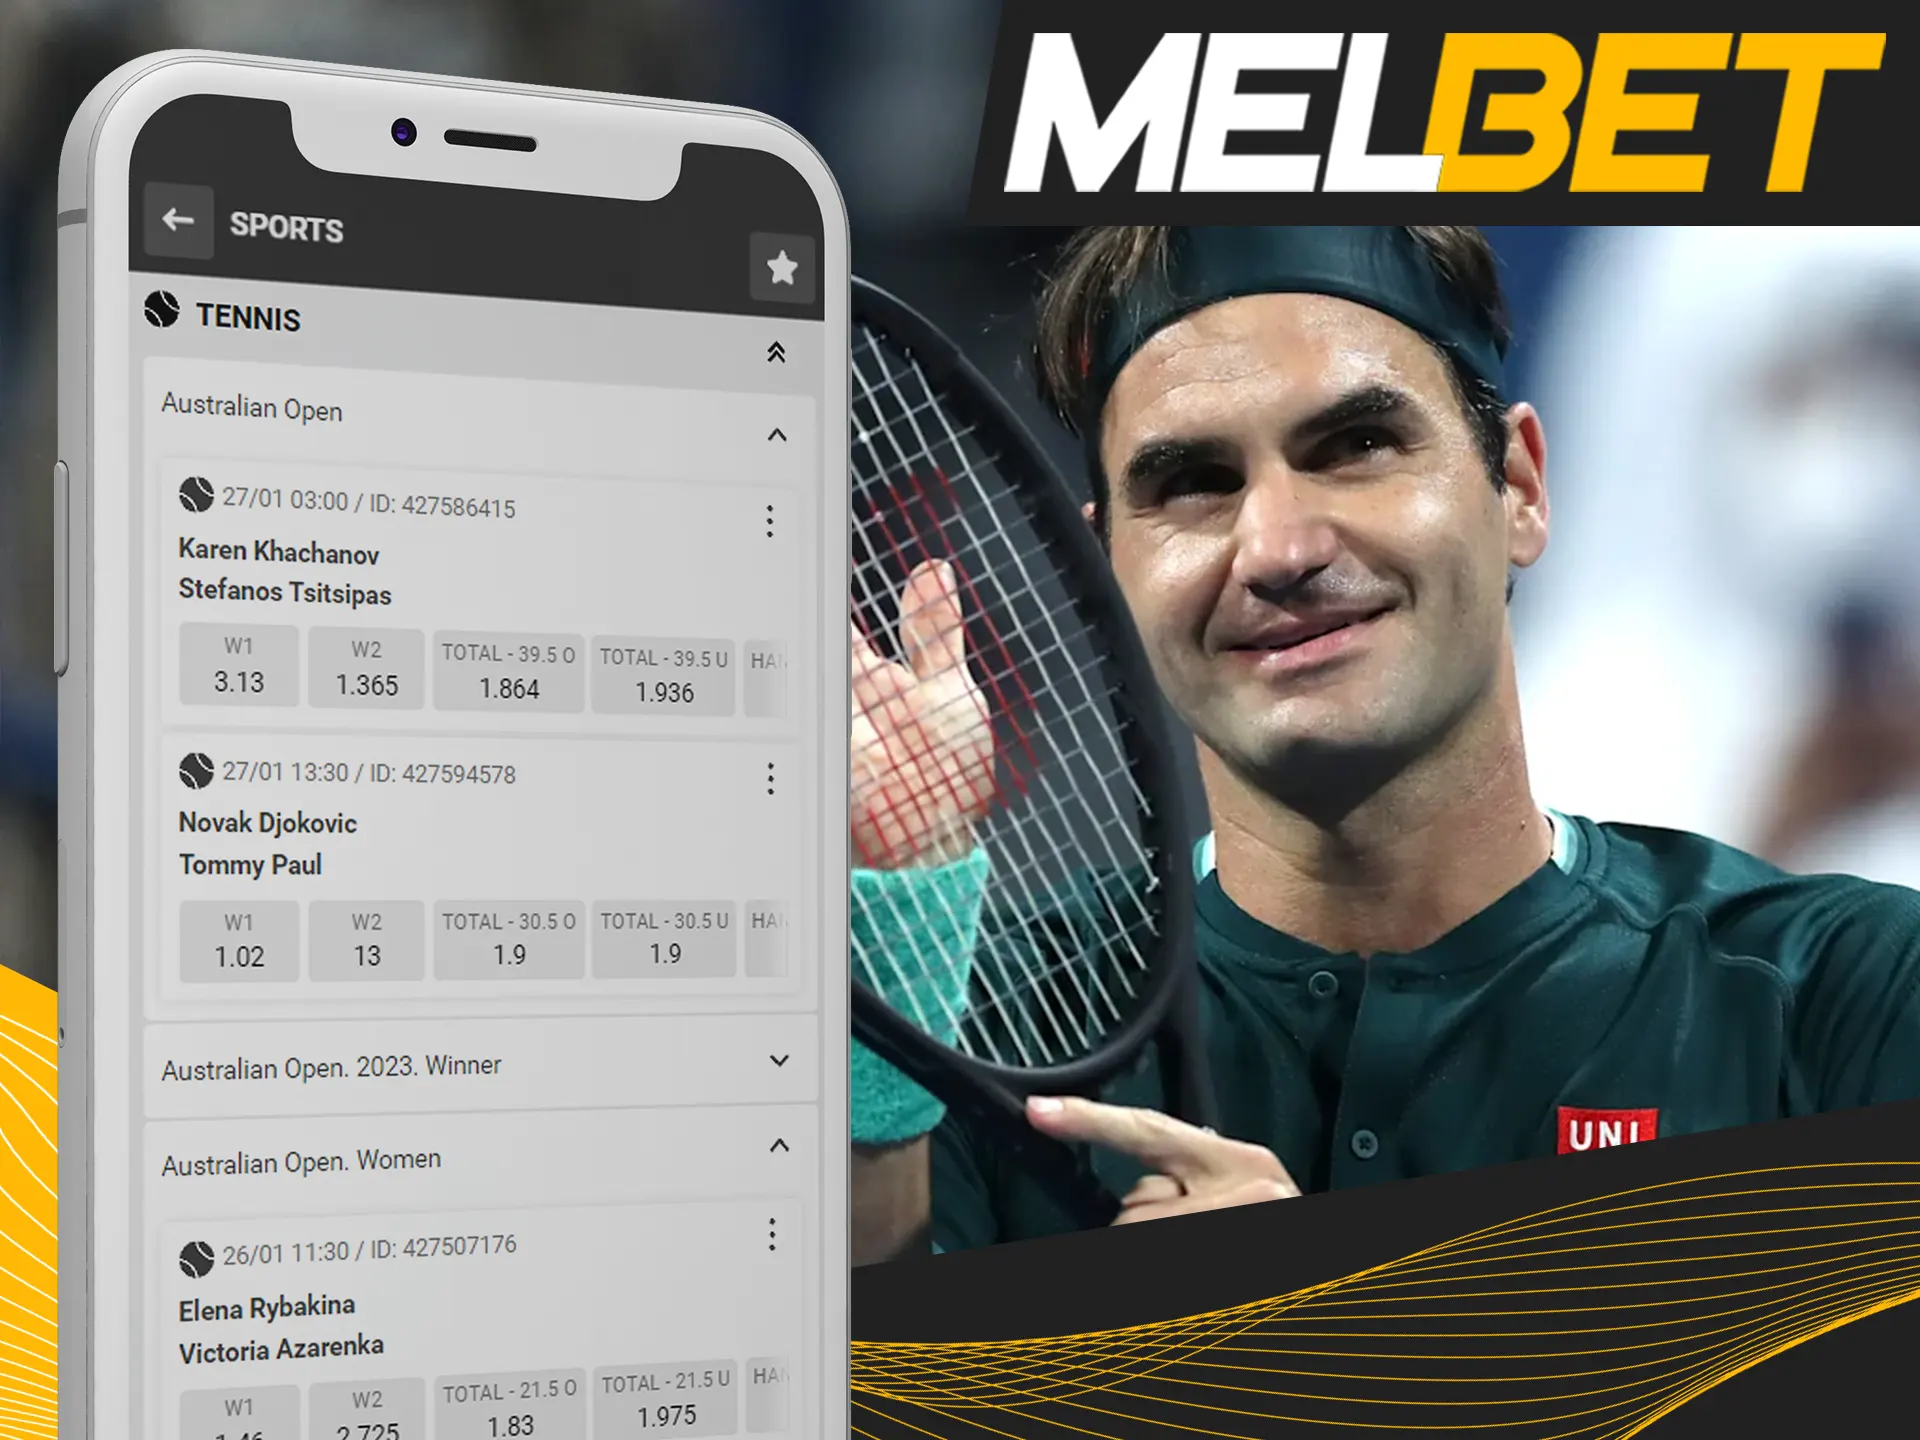 Bet on your favourite tennis player at Melbet.